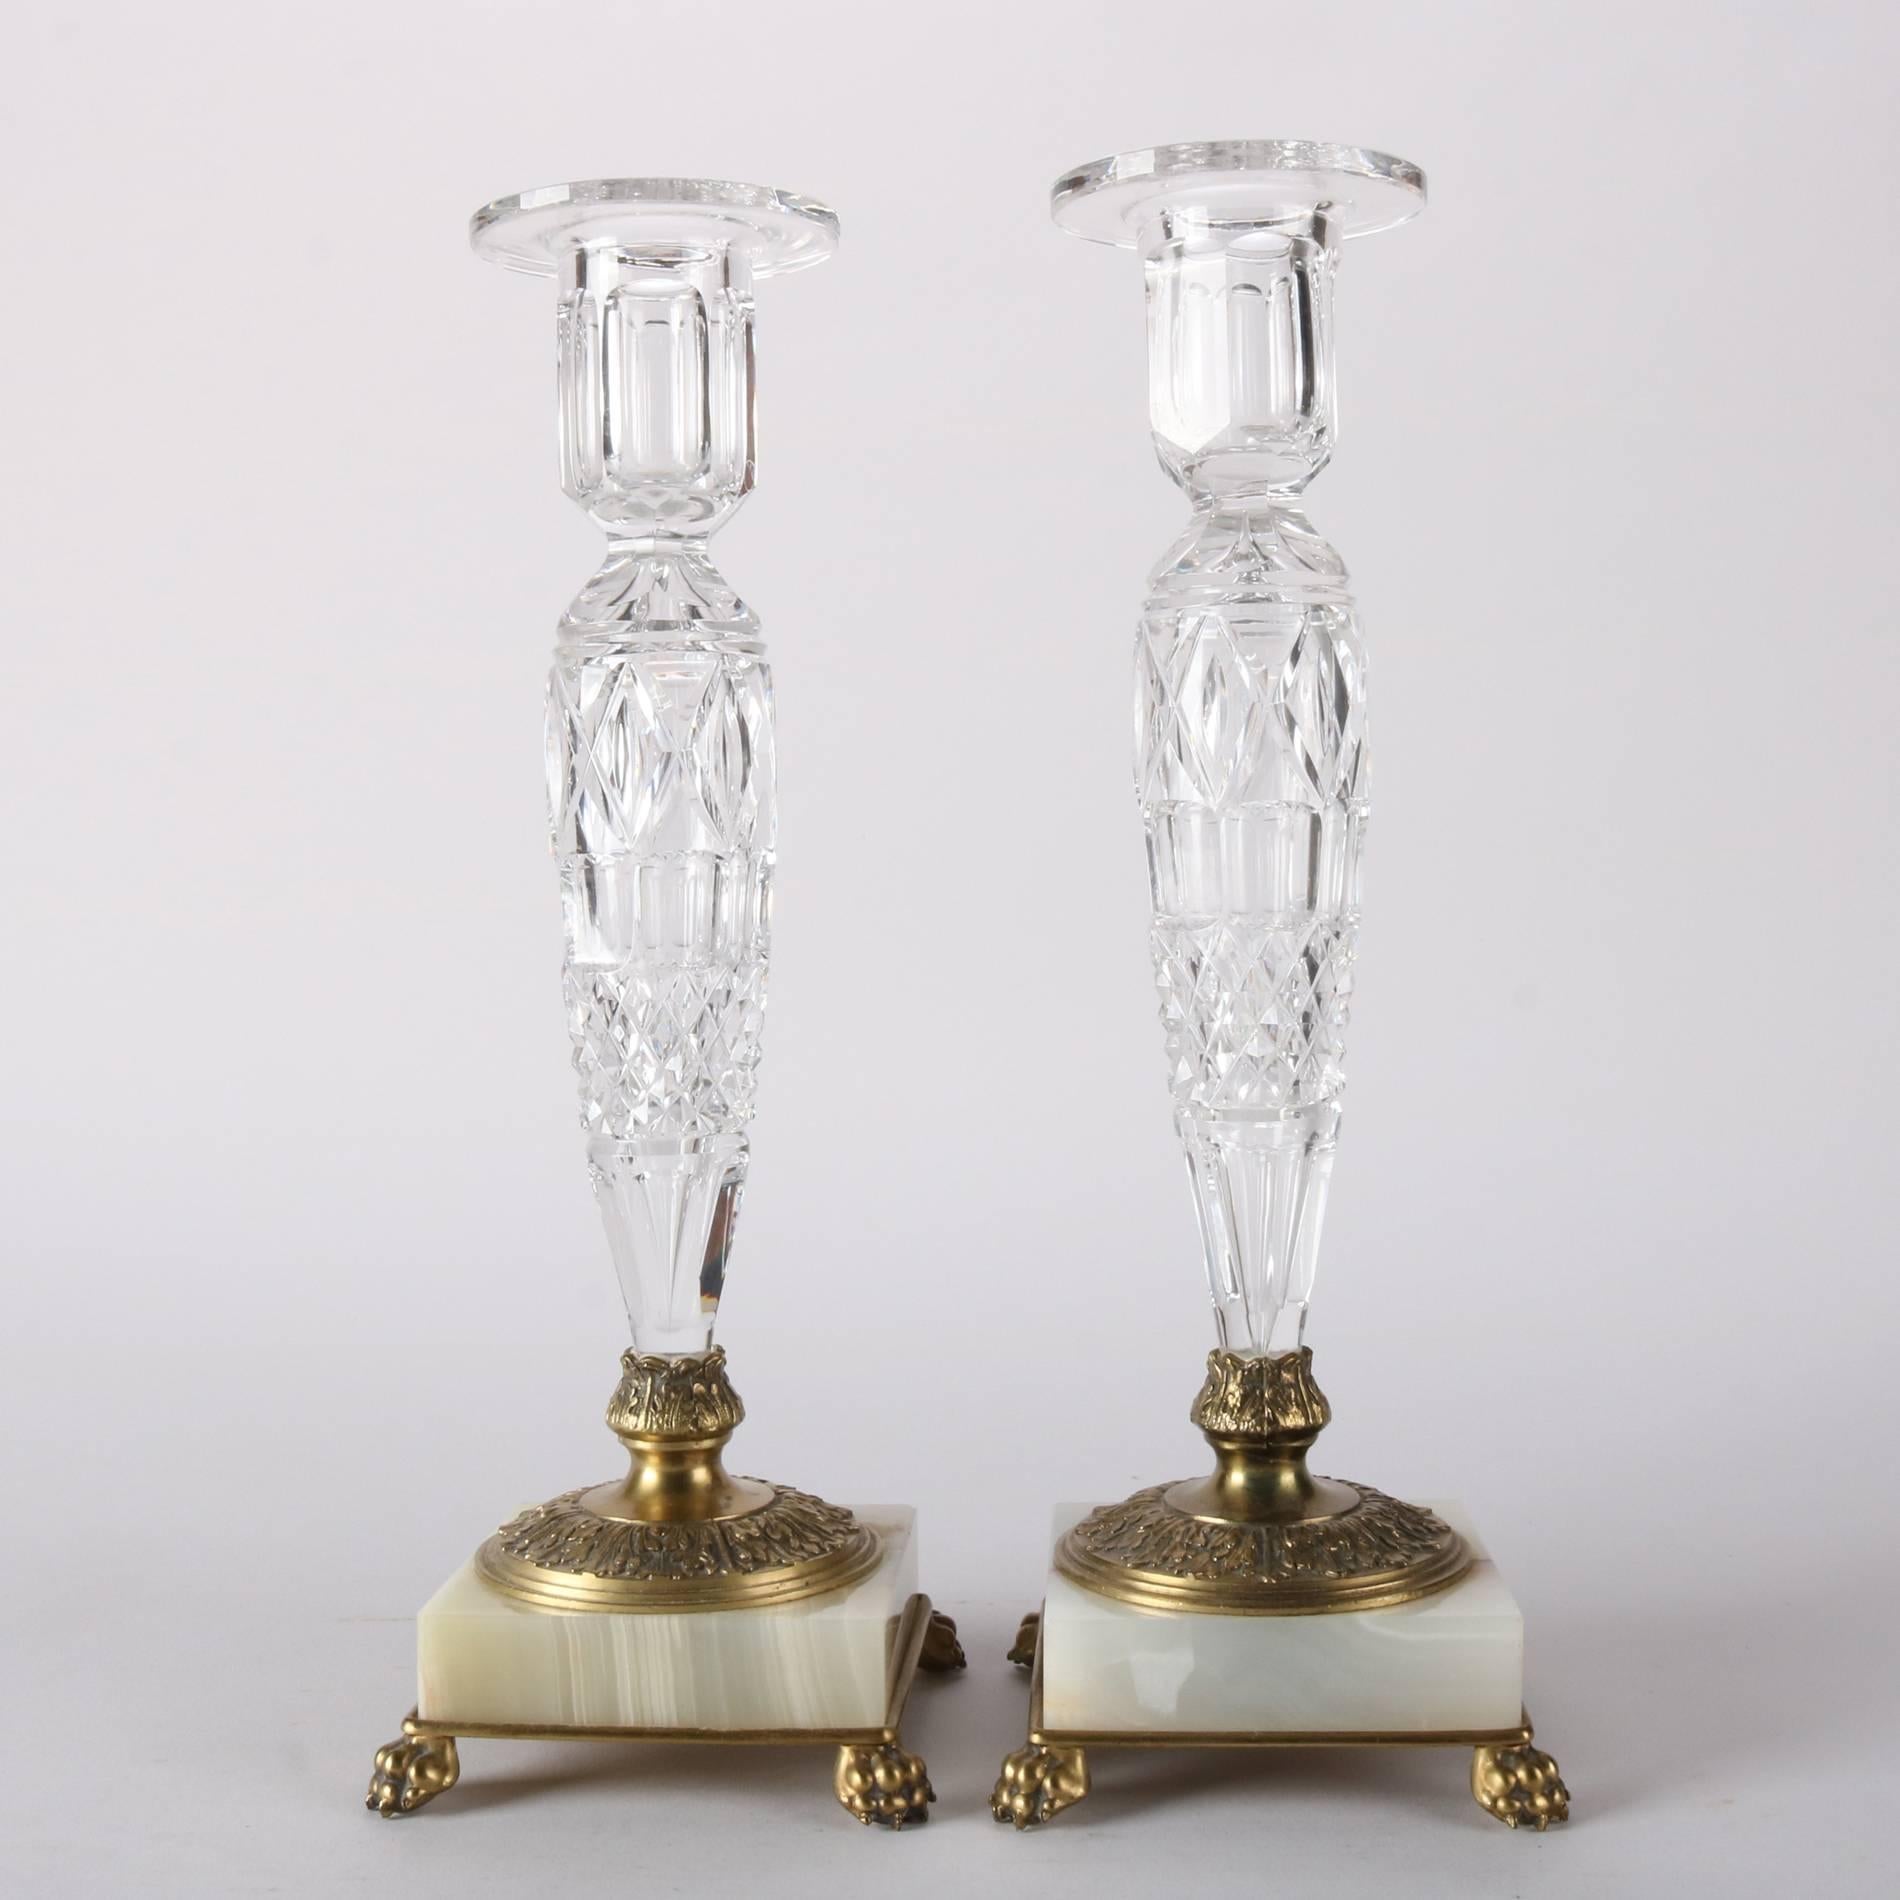 20th Century Pair of Antique Pairpoint Cut Crystal, Onyx and Brass Footed Candle Sticks